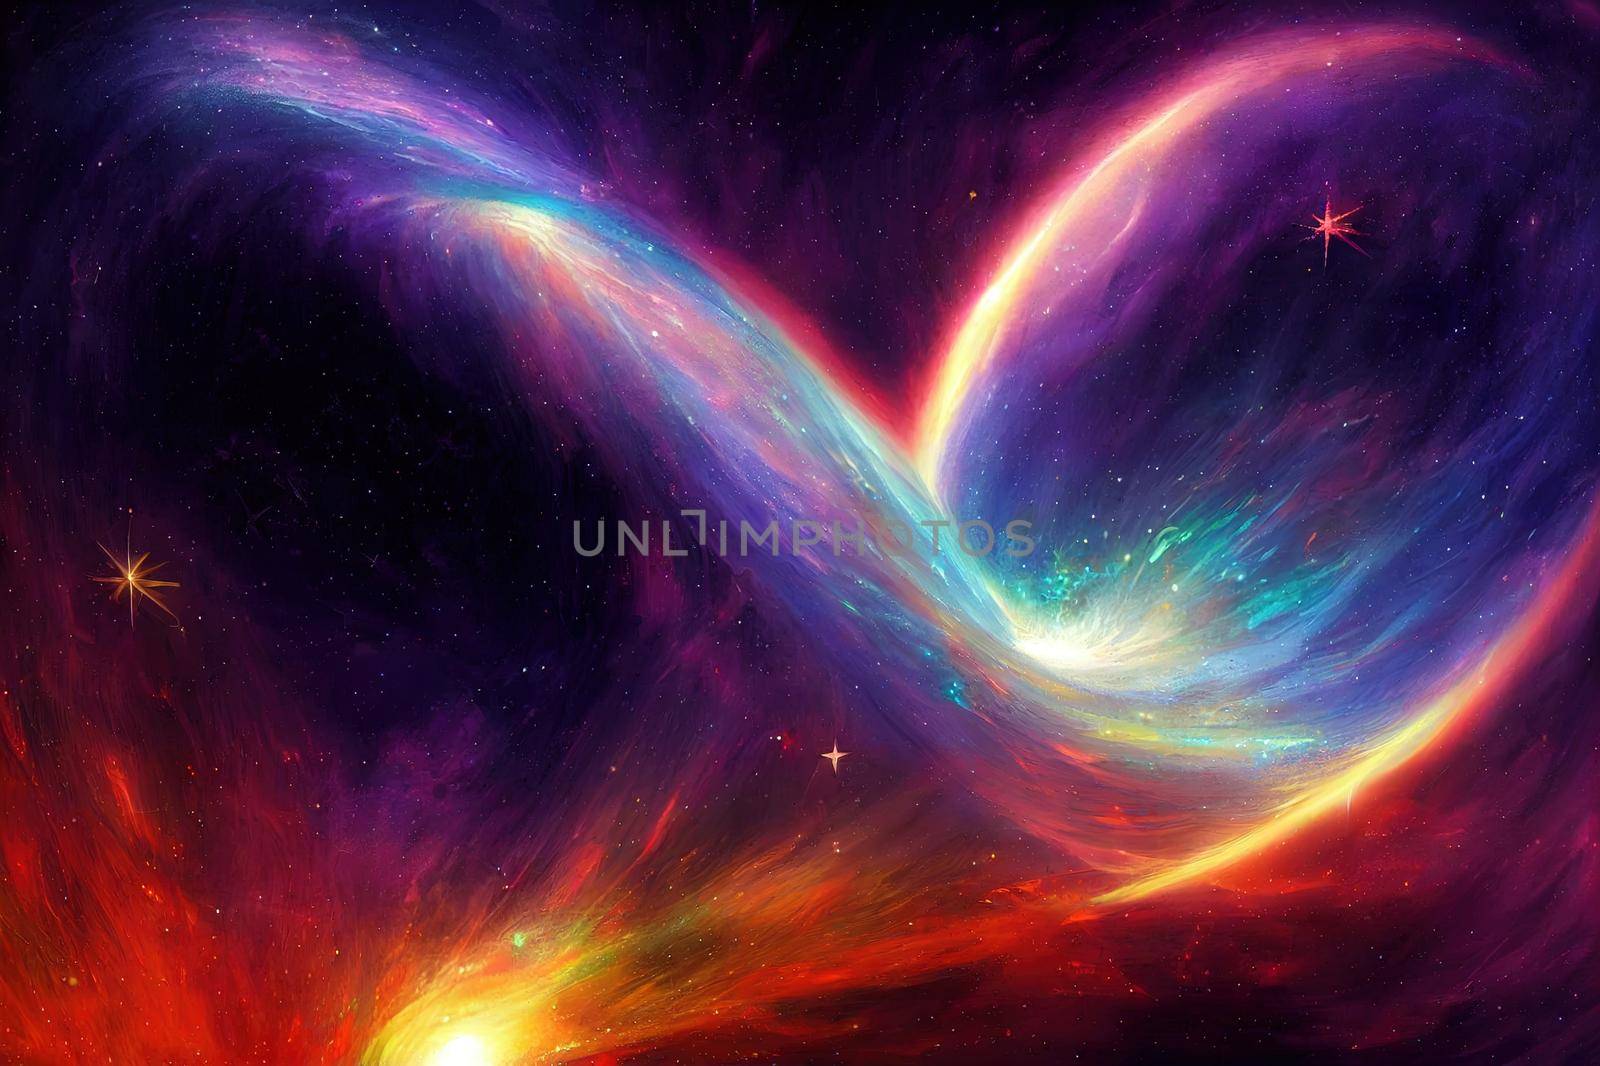 Cosmic artistic illustration. Colorful galaxy background with stars